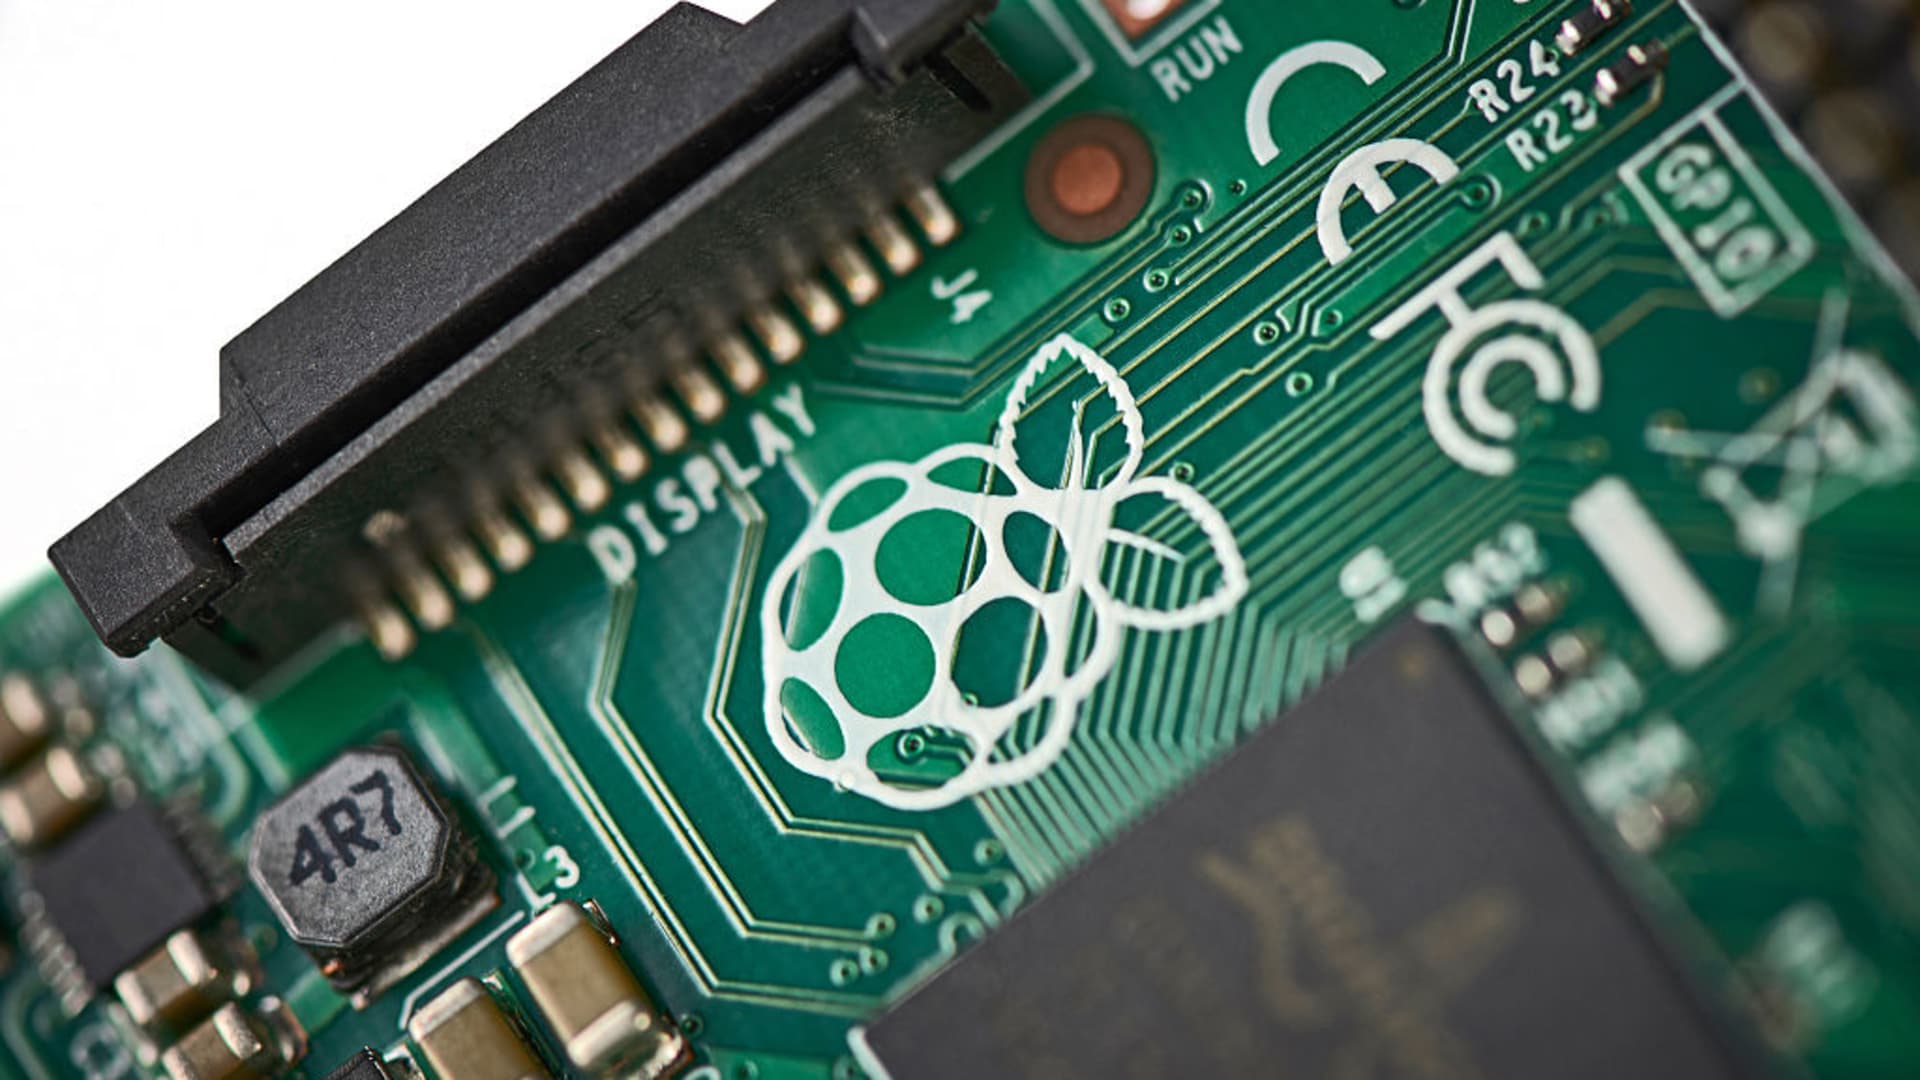 Sony-backed Raspberry Pi heads for rare London IPO